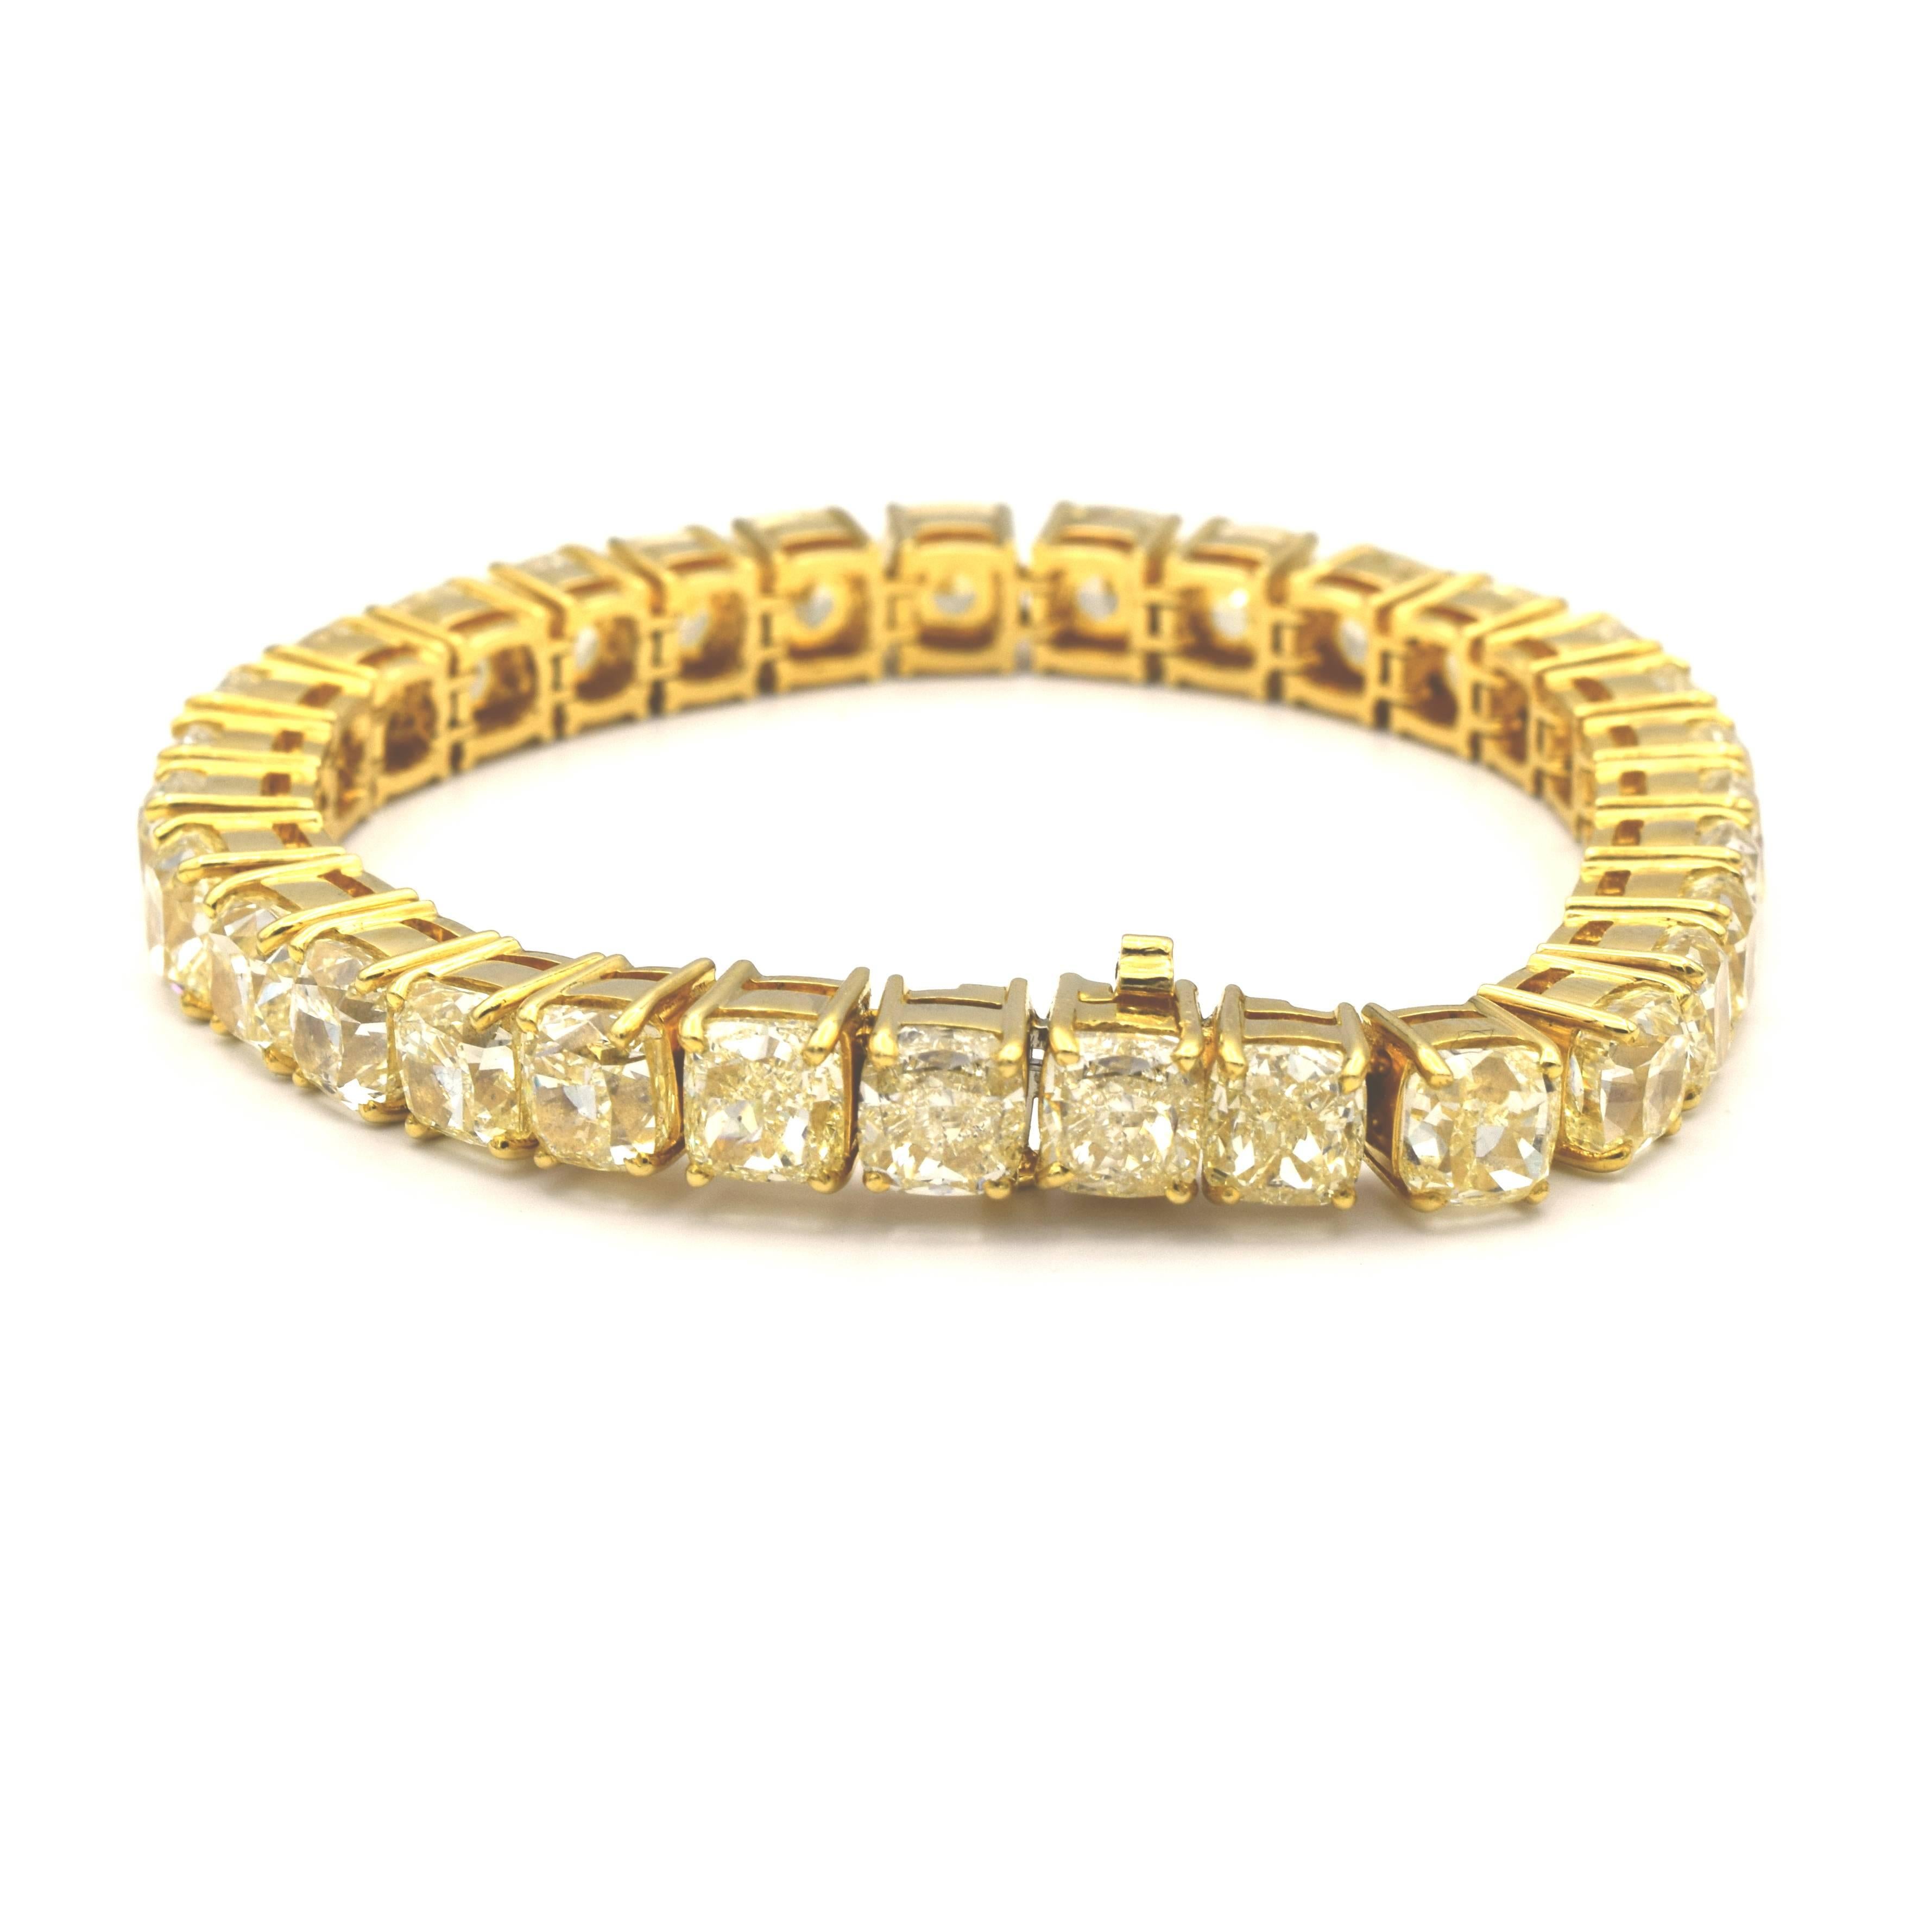 47.13 Carat Yellow Diamond Tennis Bracelet in 18K  In New Condition For Sale In Los Angeles, CA